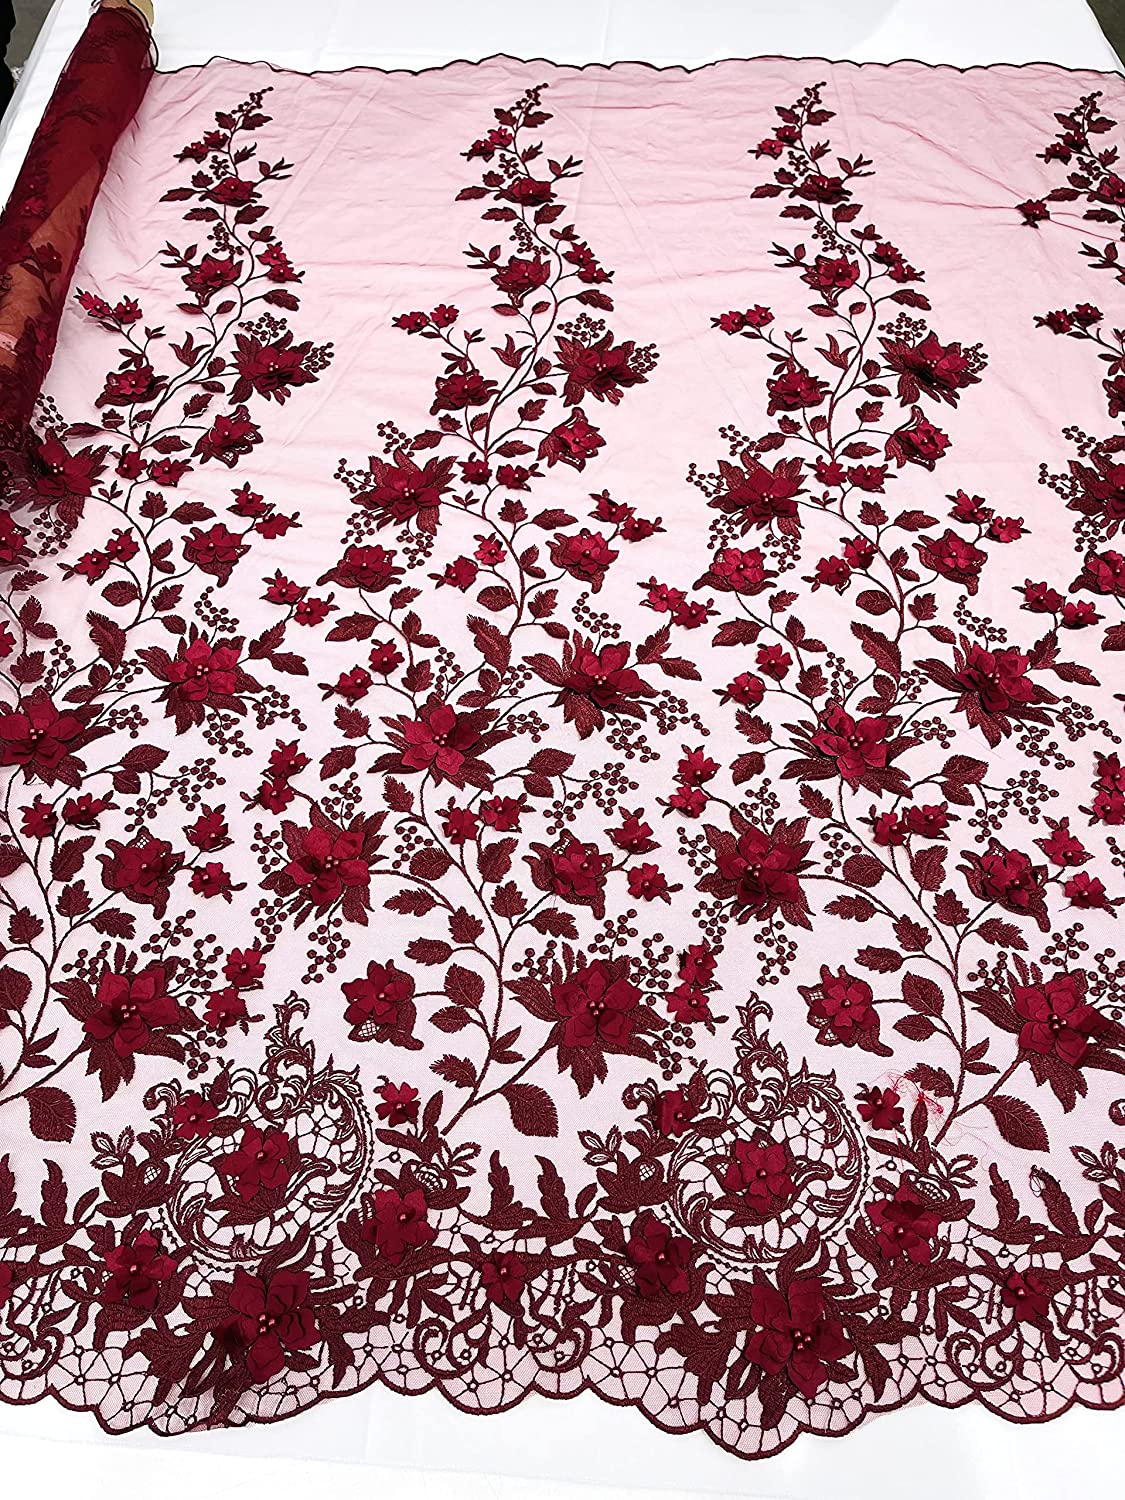 Emily 3-D Floral Design Embroider with Pearls On A Mesh Lace Fabric (1 Yard, Burgundy)